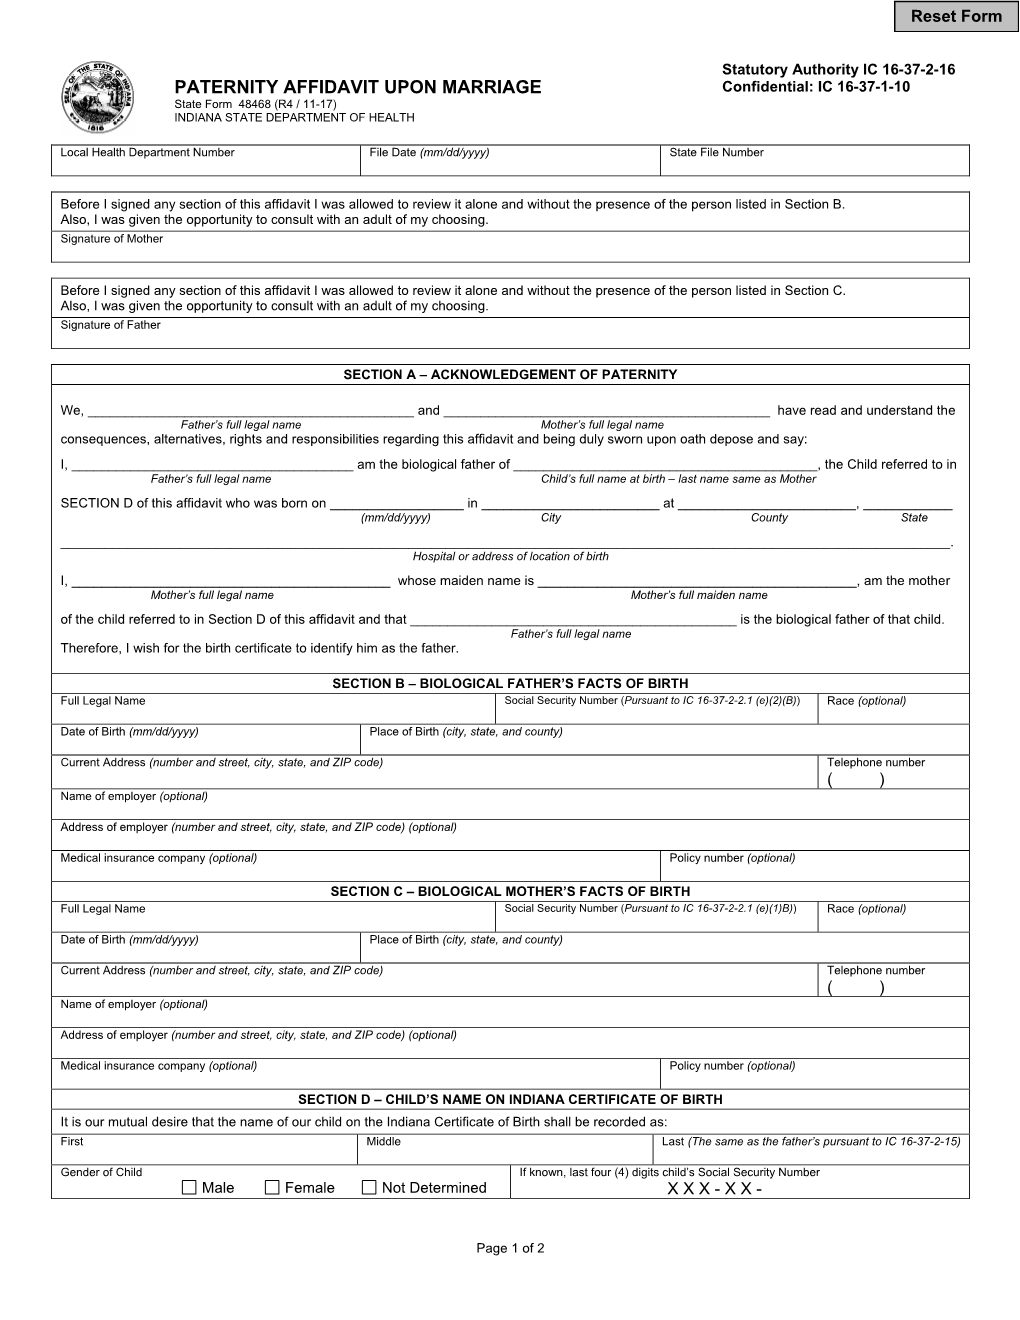 PATERNITY AFFIDAVIT UPON MARRIAGE Confidential: IC 16-37-1-10 State Form 48468 (R4 / 11-17) INDIANA STATE DEPARTMENT of HEALTH